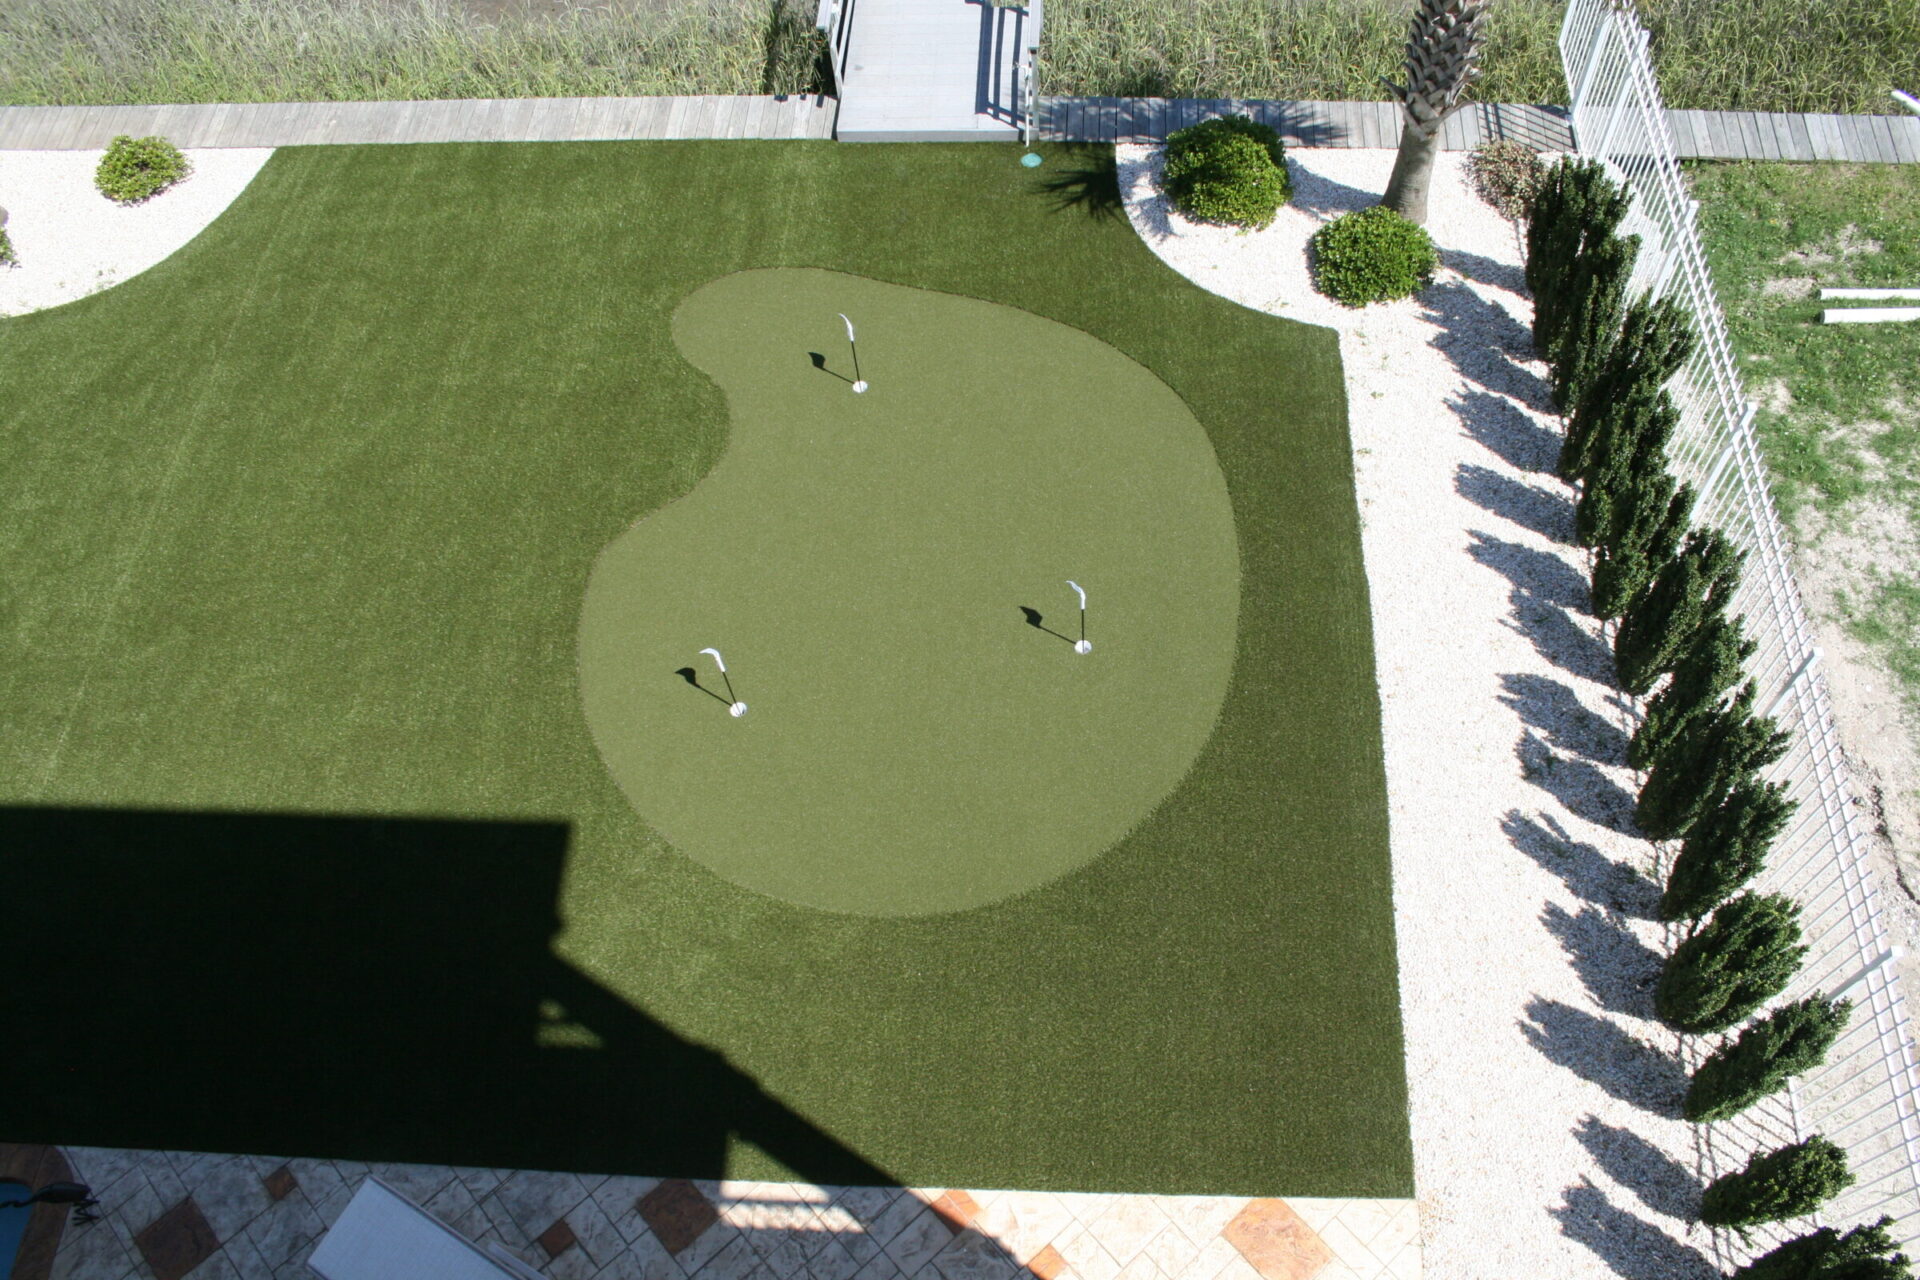 Aerial view of a private artificial turf putting green with three golf clubs and balls. Surrounded by a fence, trees, and landscaped areas.